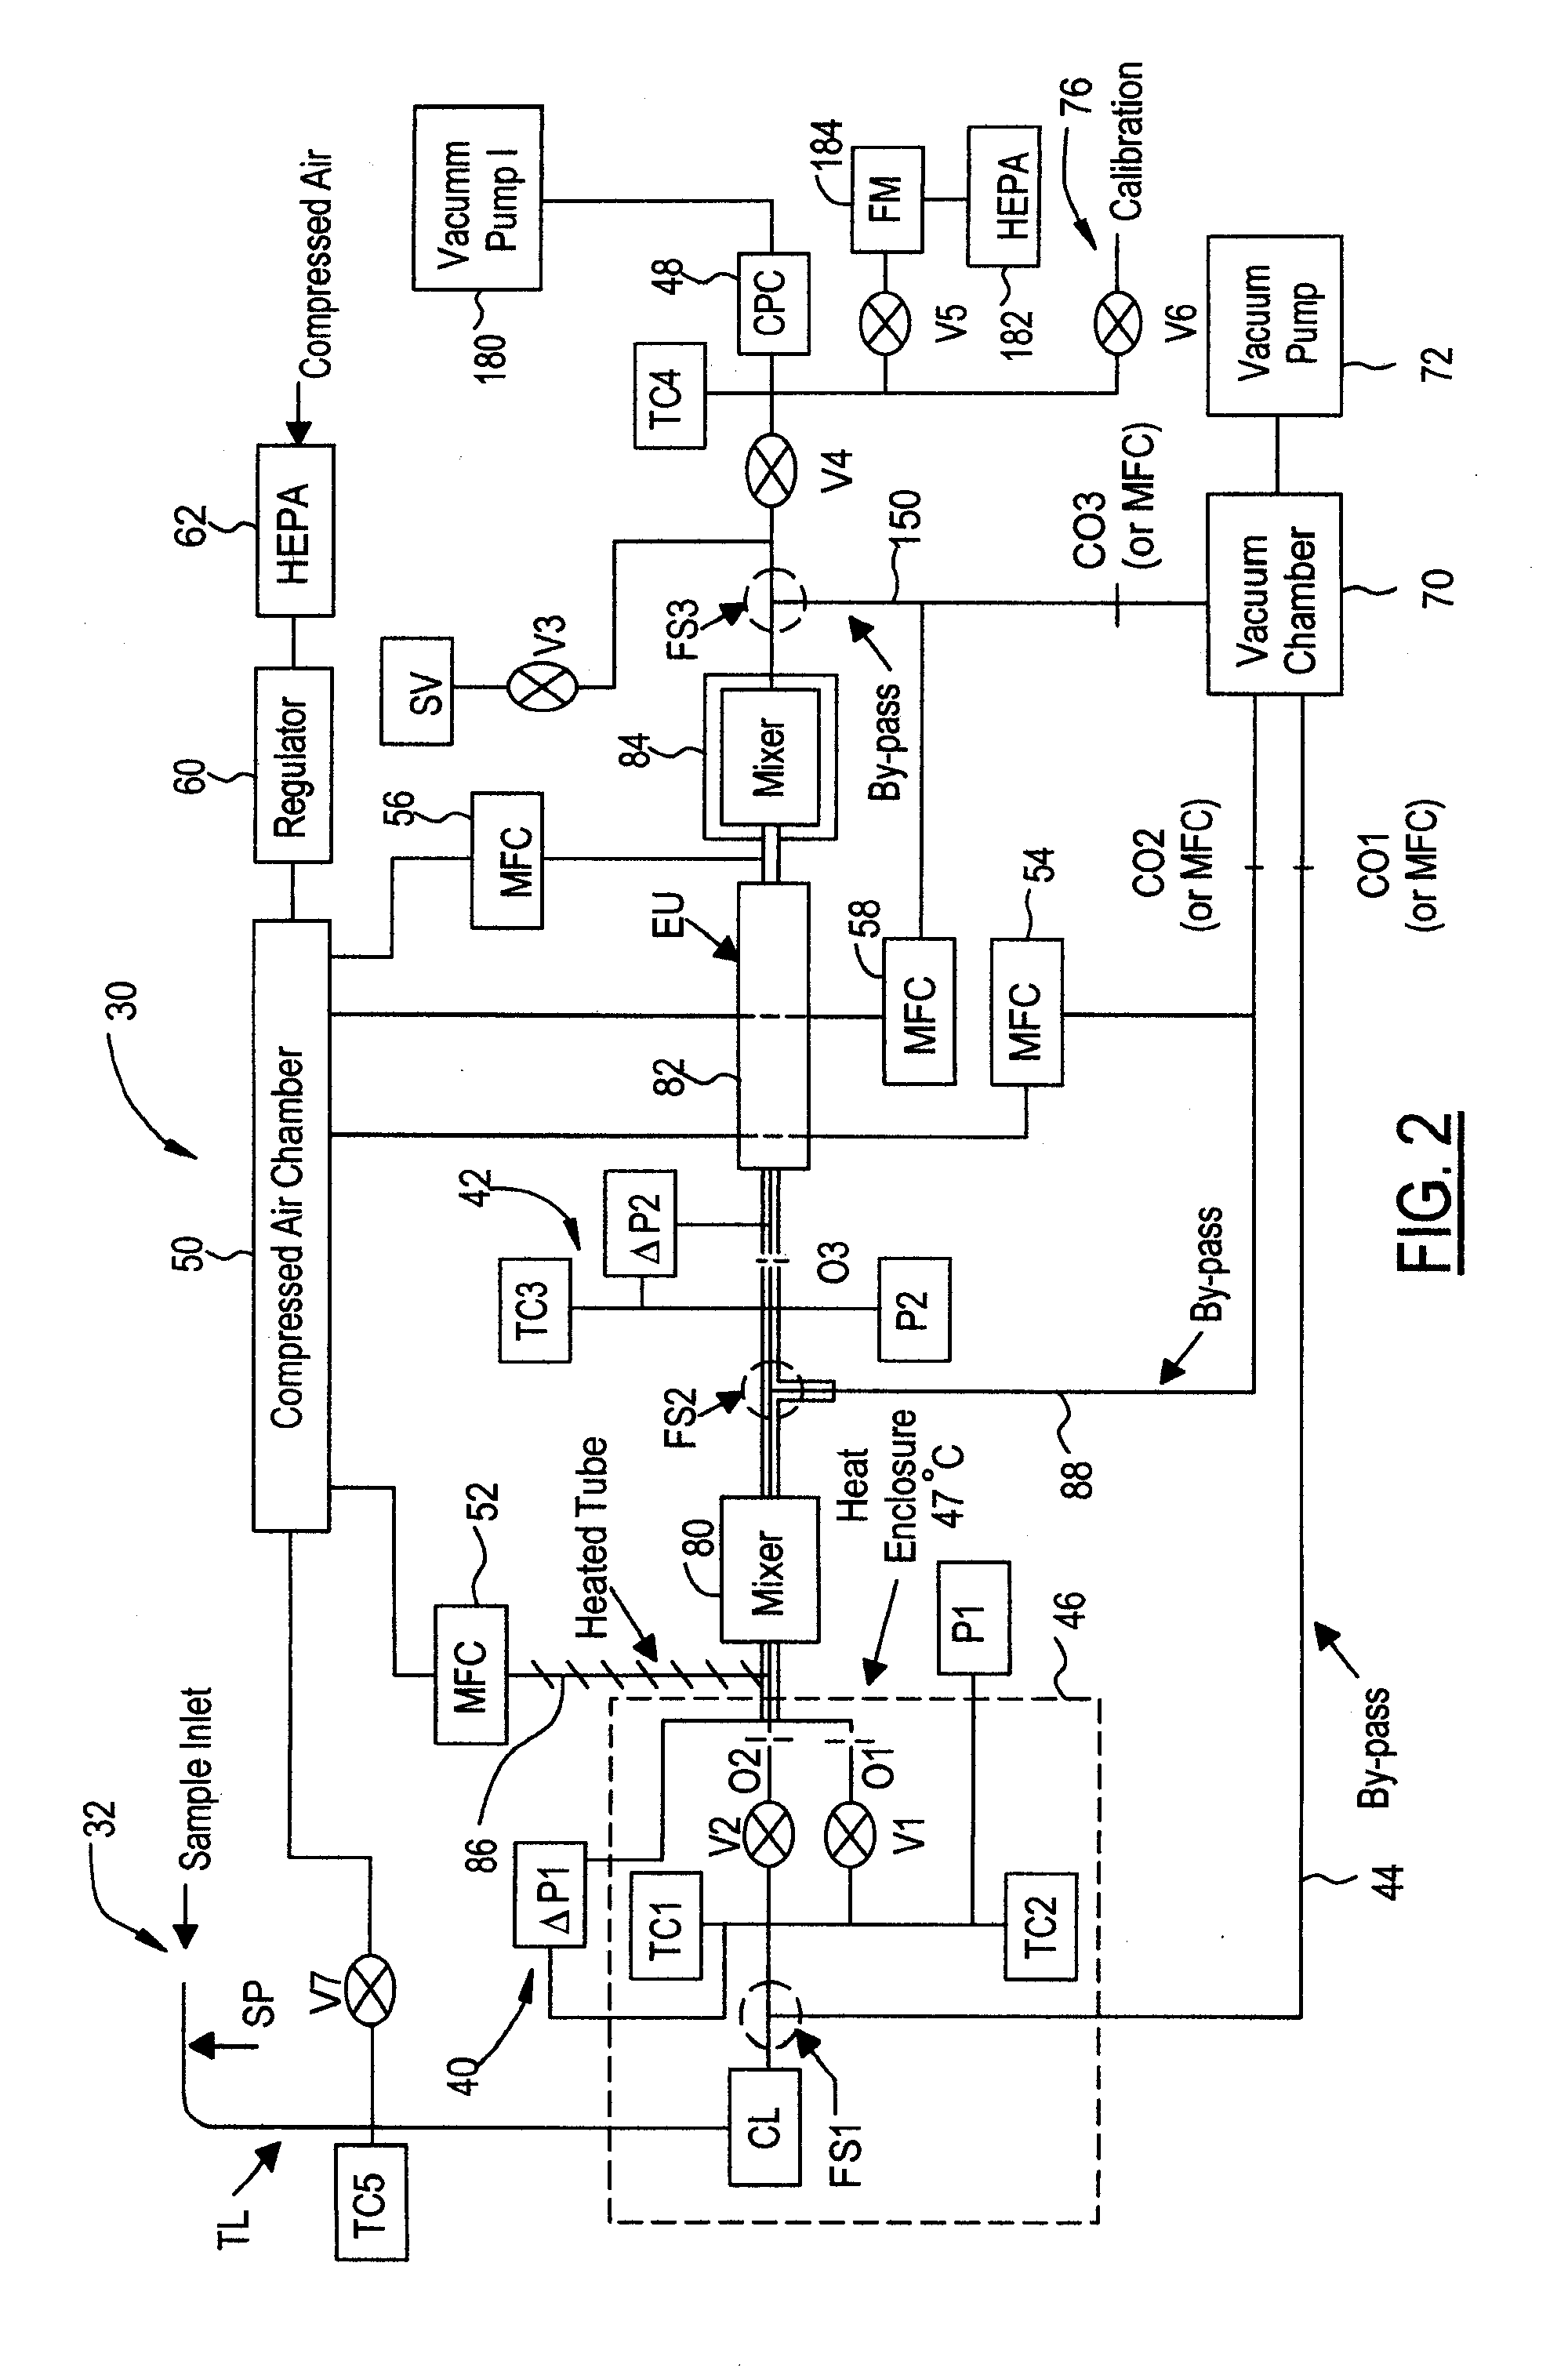 Solid particle counting system with valve to allow reduction of pressure pulse at particle counter when vacuum pump is started